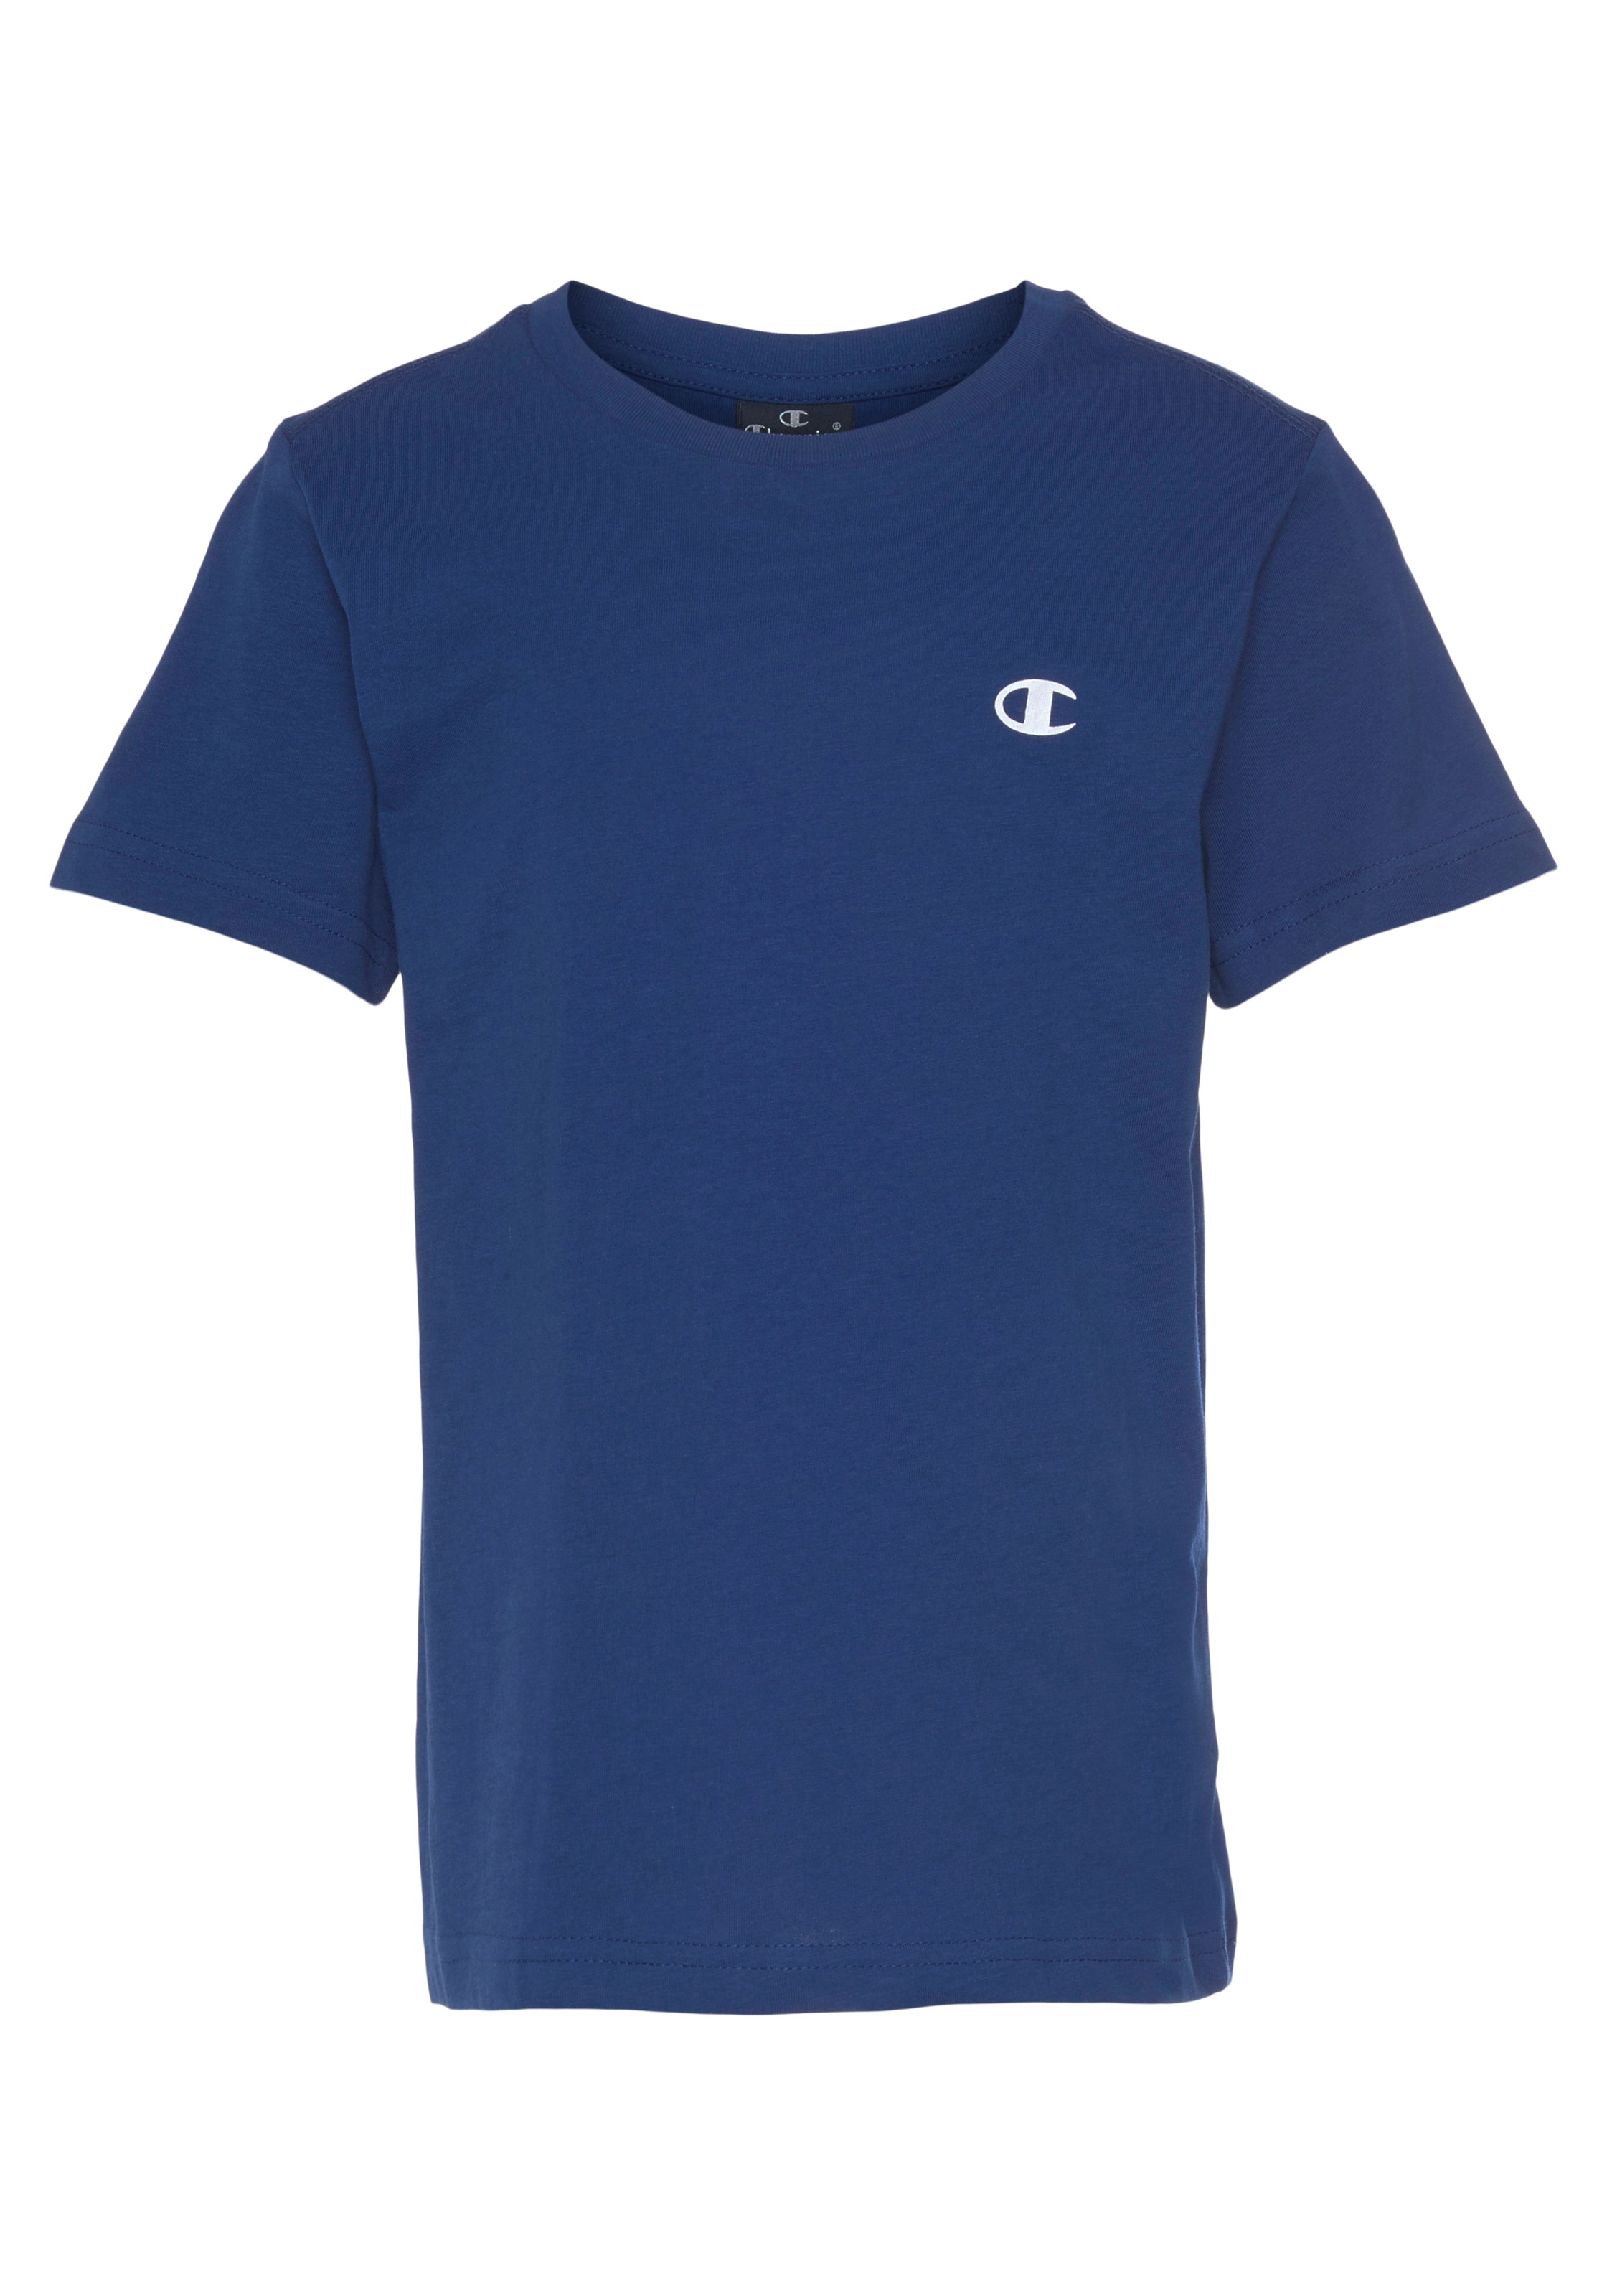 2 T-Shirt OTTO tlg.) bei CREW NECK«, »2-PCK Champion (Packung,